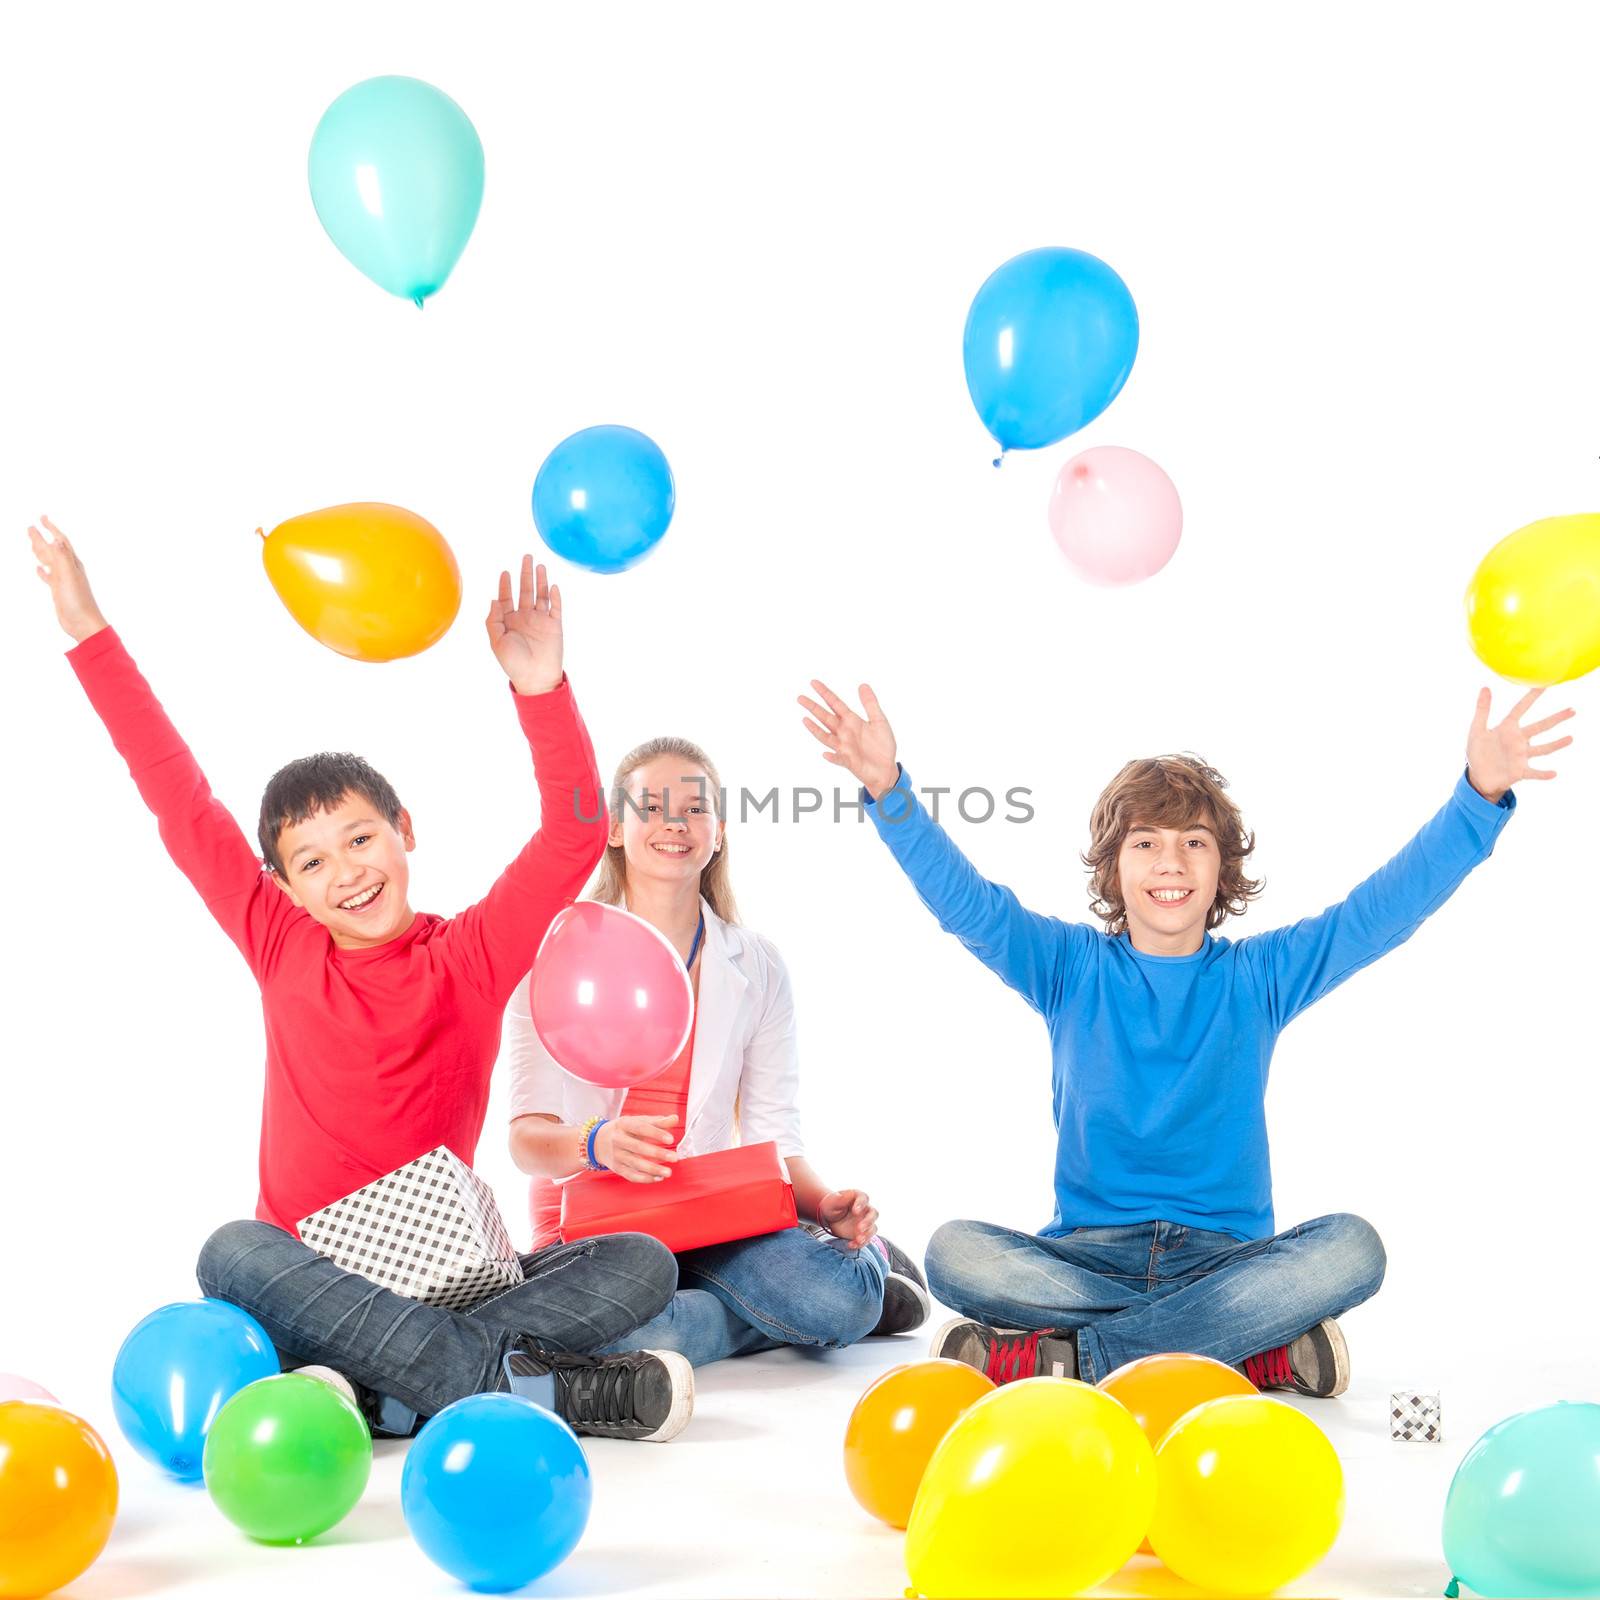 Celebrating a birthday with presents and balloons on a white background